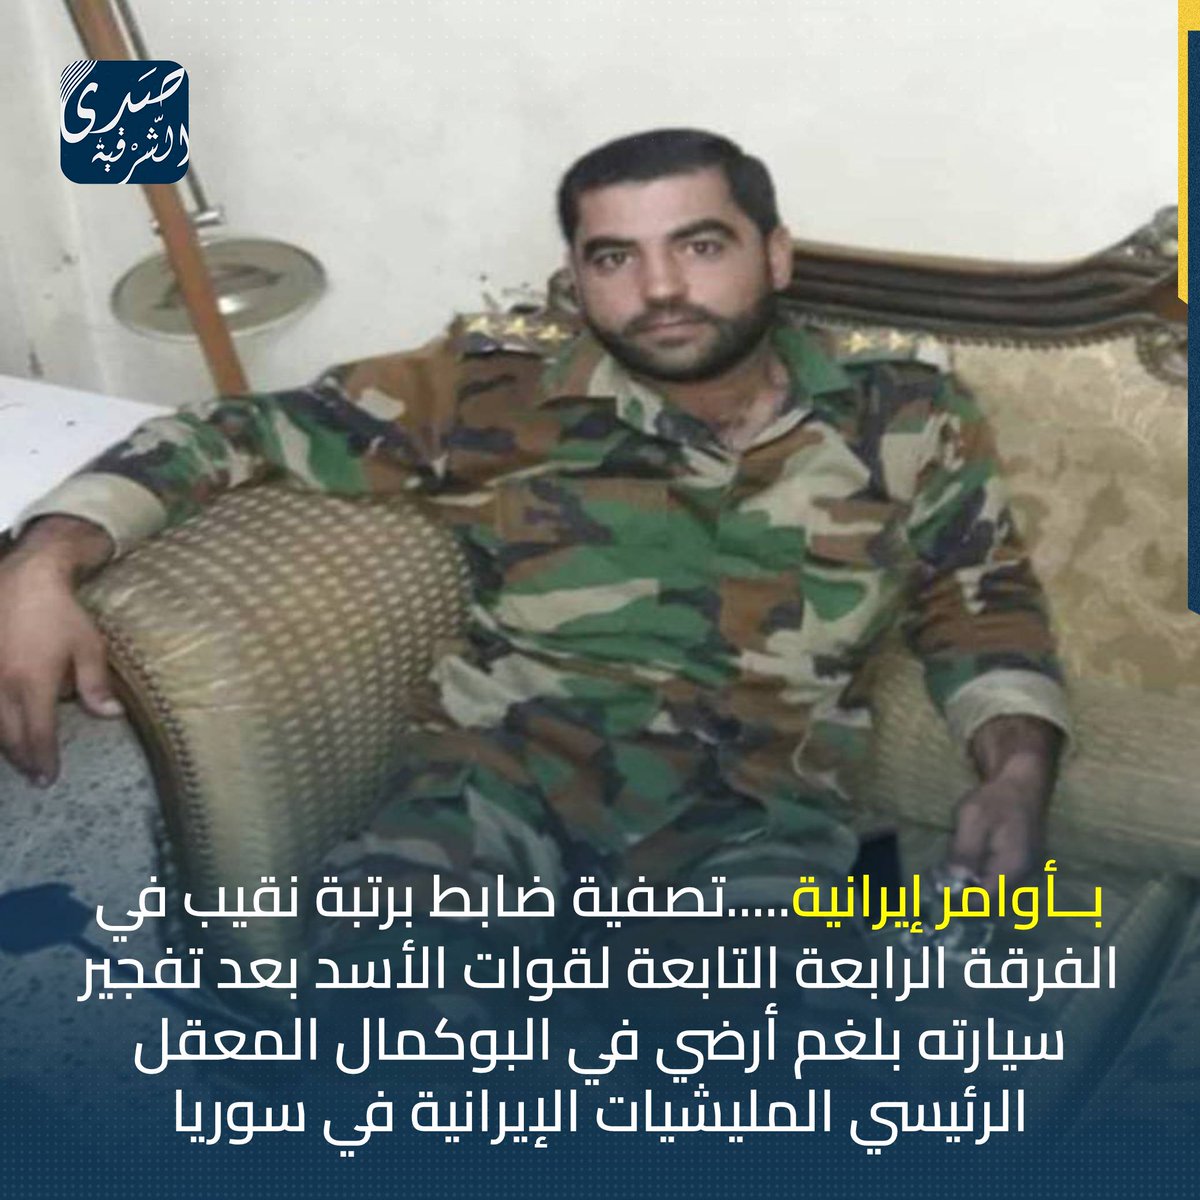 In al-Bukamal. The liquidation of an officer in al-Assad's forces by special Iranian orders reported the killing of Raed al-Aqra', a captain in the militia of the Fourth Division of al-Assad's forces, as a result of the explosion of a landmine in his car in the Salhia al-Bukamal area.